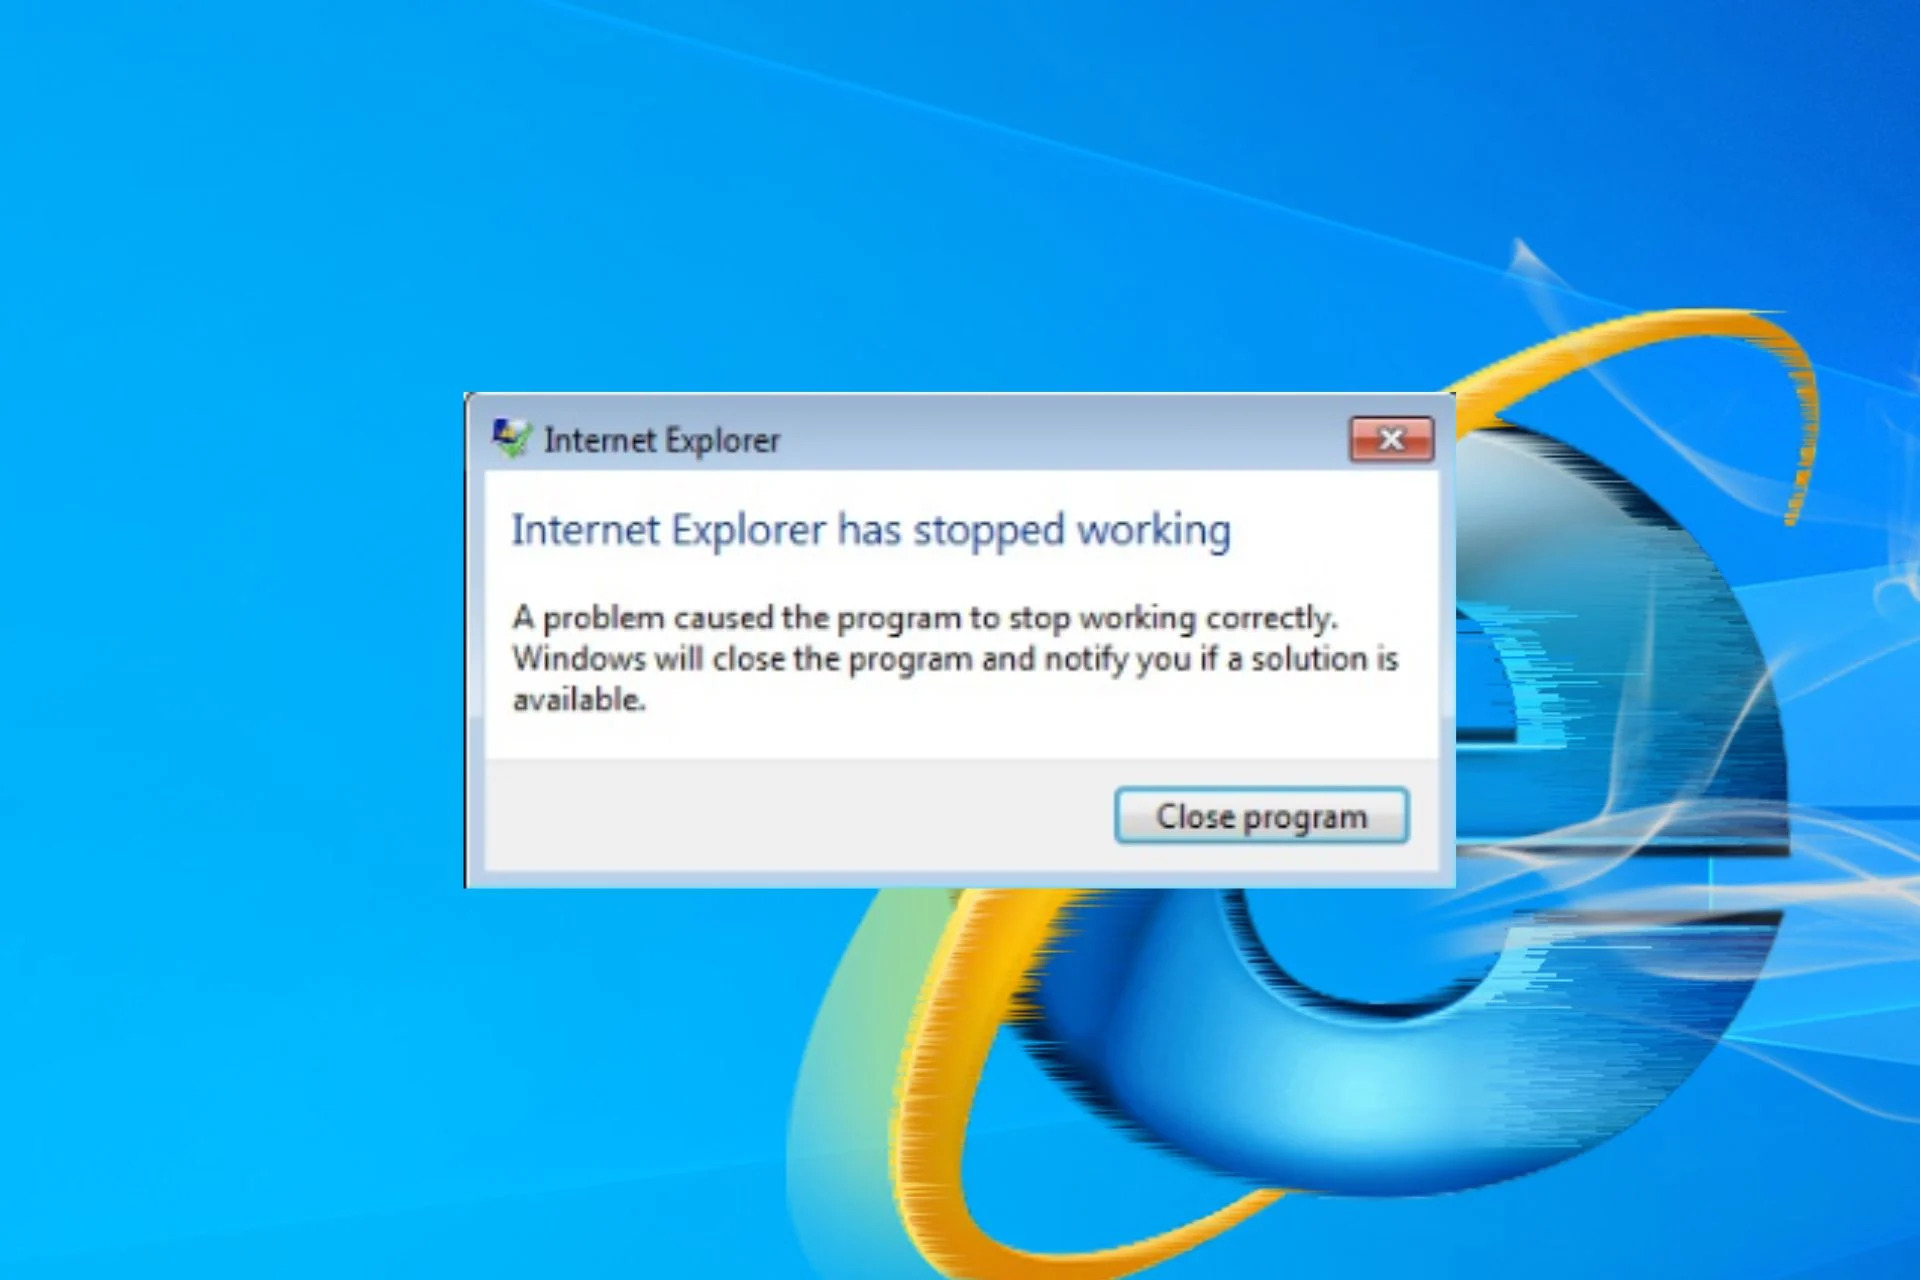 How To Fix The ‘Internet Explorer Has Stopped Working’ Error